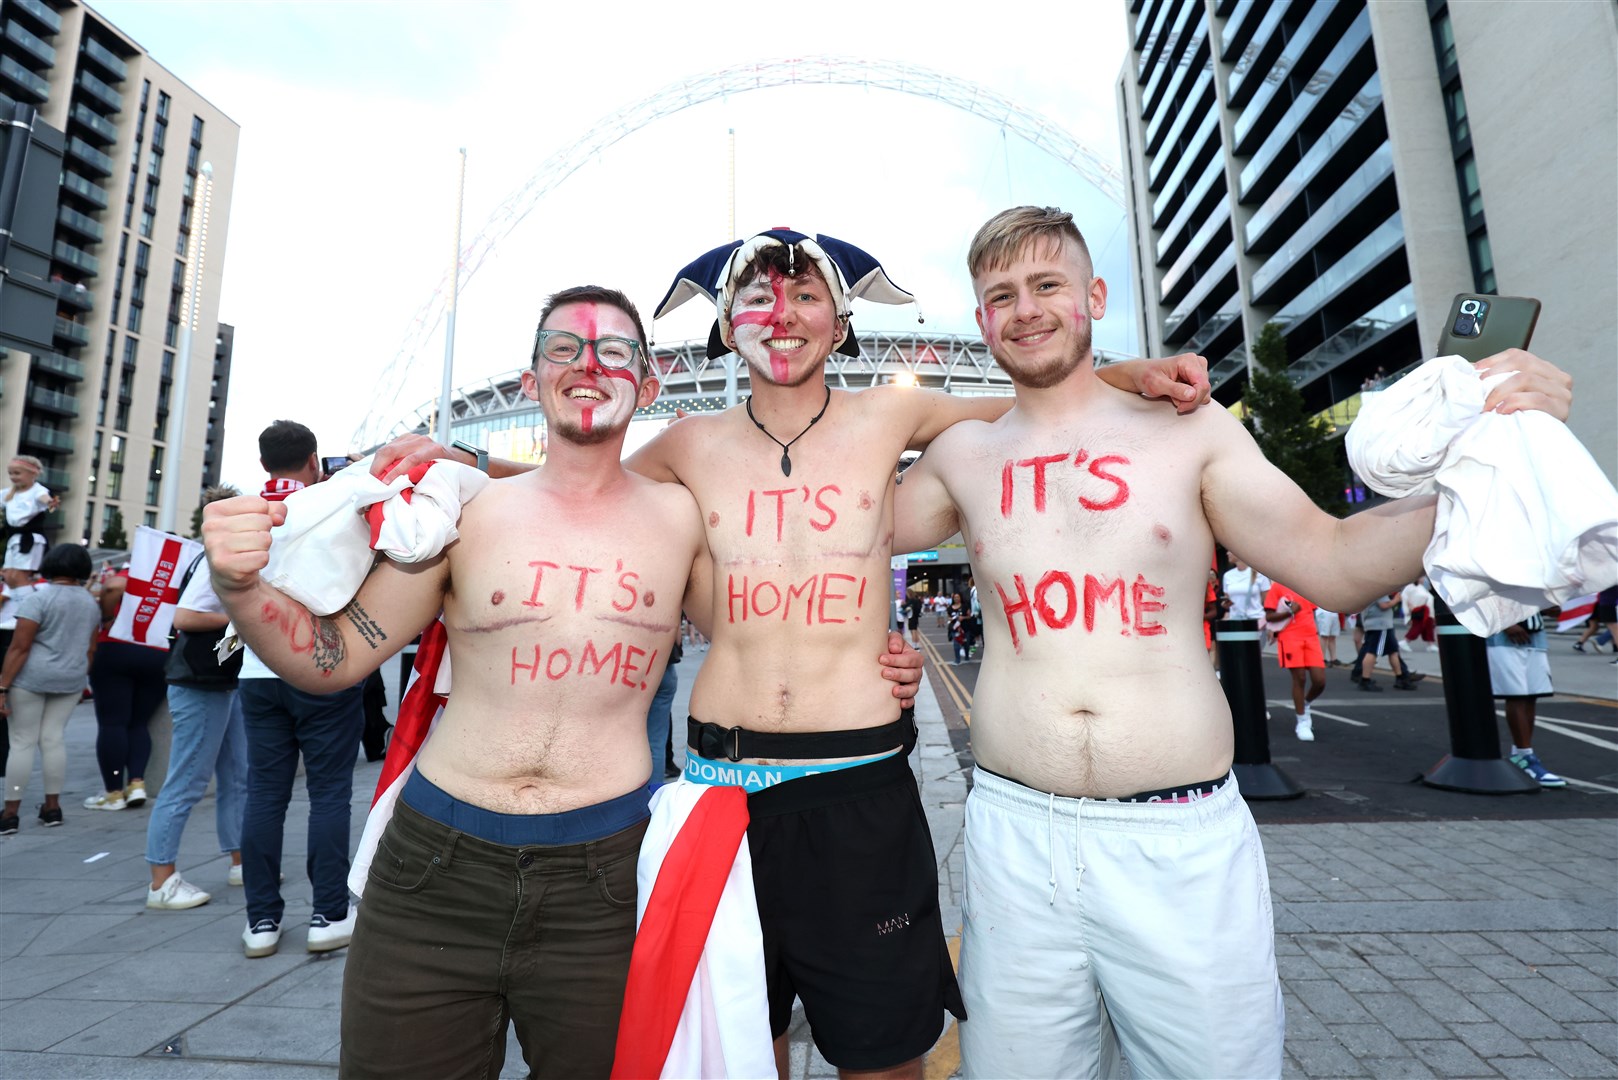 England fans celebrate with body paint at Wembley Stadium (James Manning/PA)